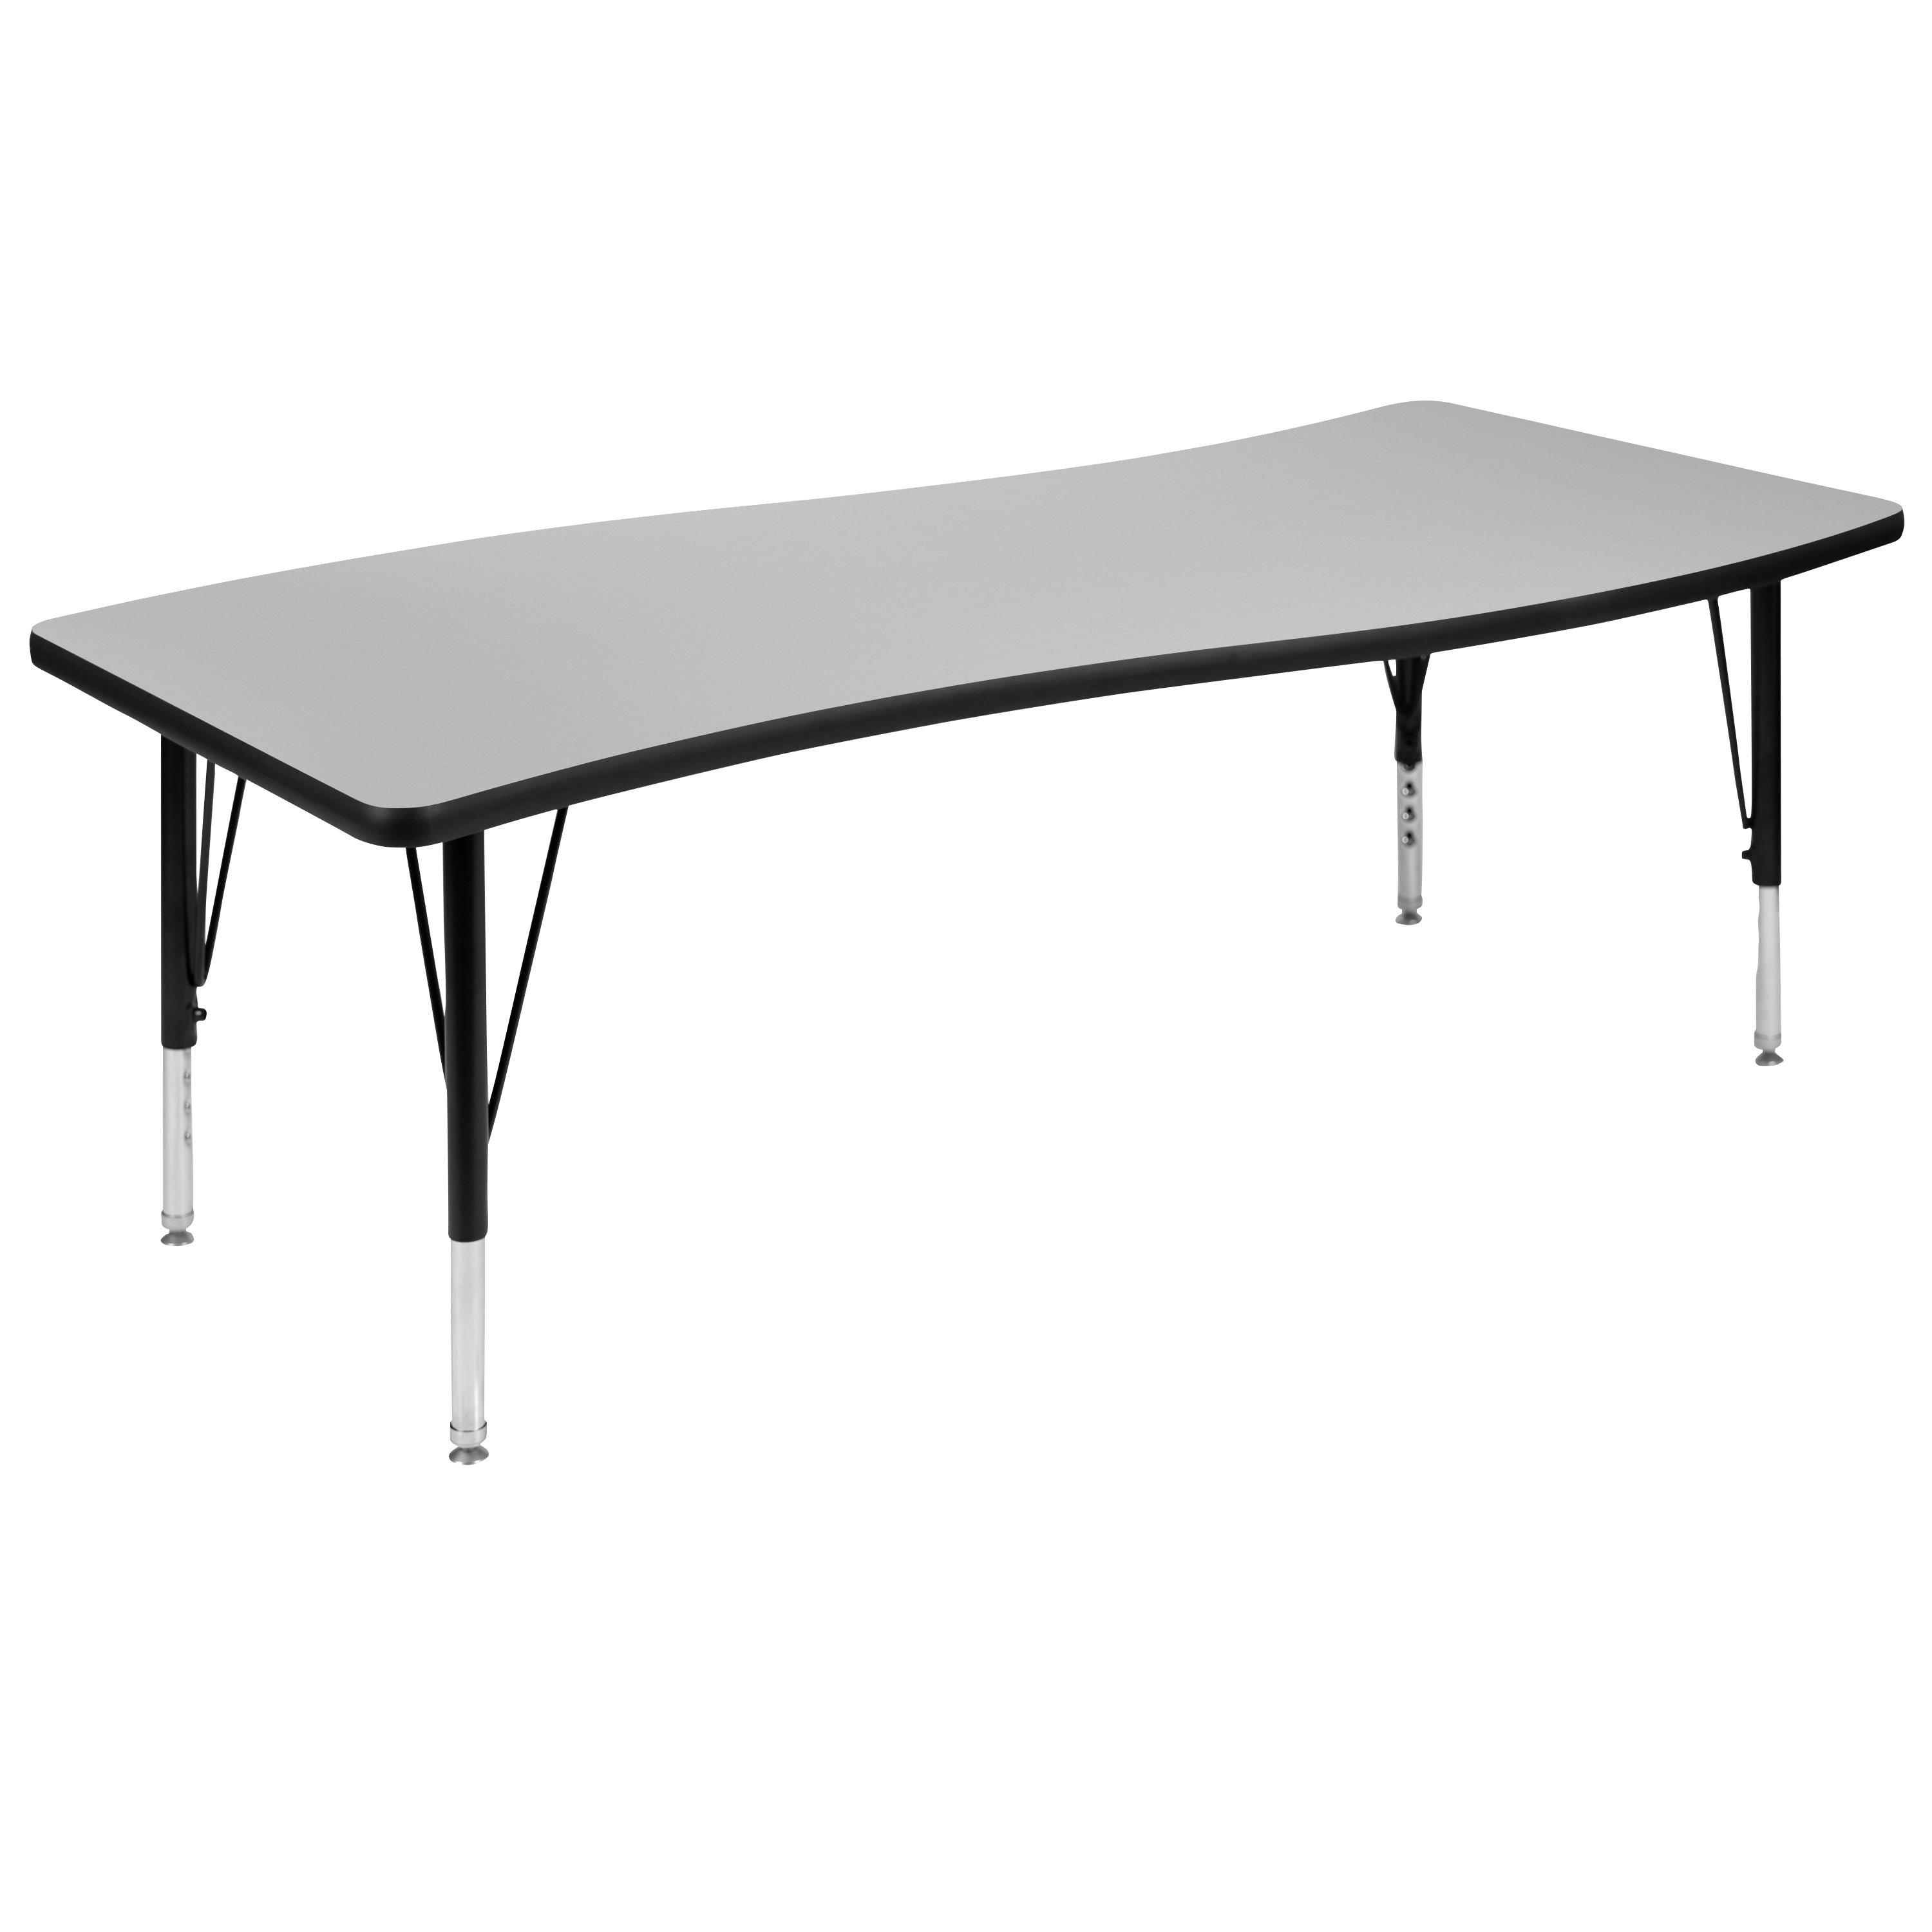 26"W x 60"L Rectangle Wave Flexible Collaborative Thermal Laminate Activity Table - Height Adjustable Short Legs-Collaborative Rectangular Activity Table-Flash Furniture-Wall2Wall Furnishings